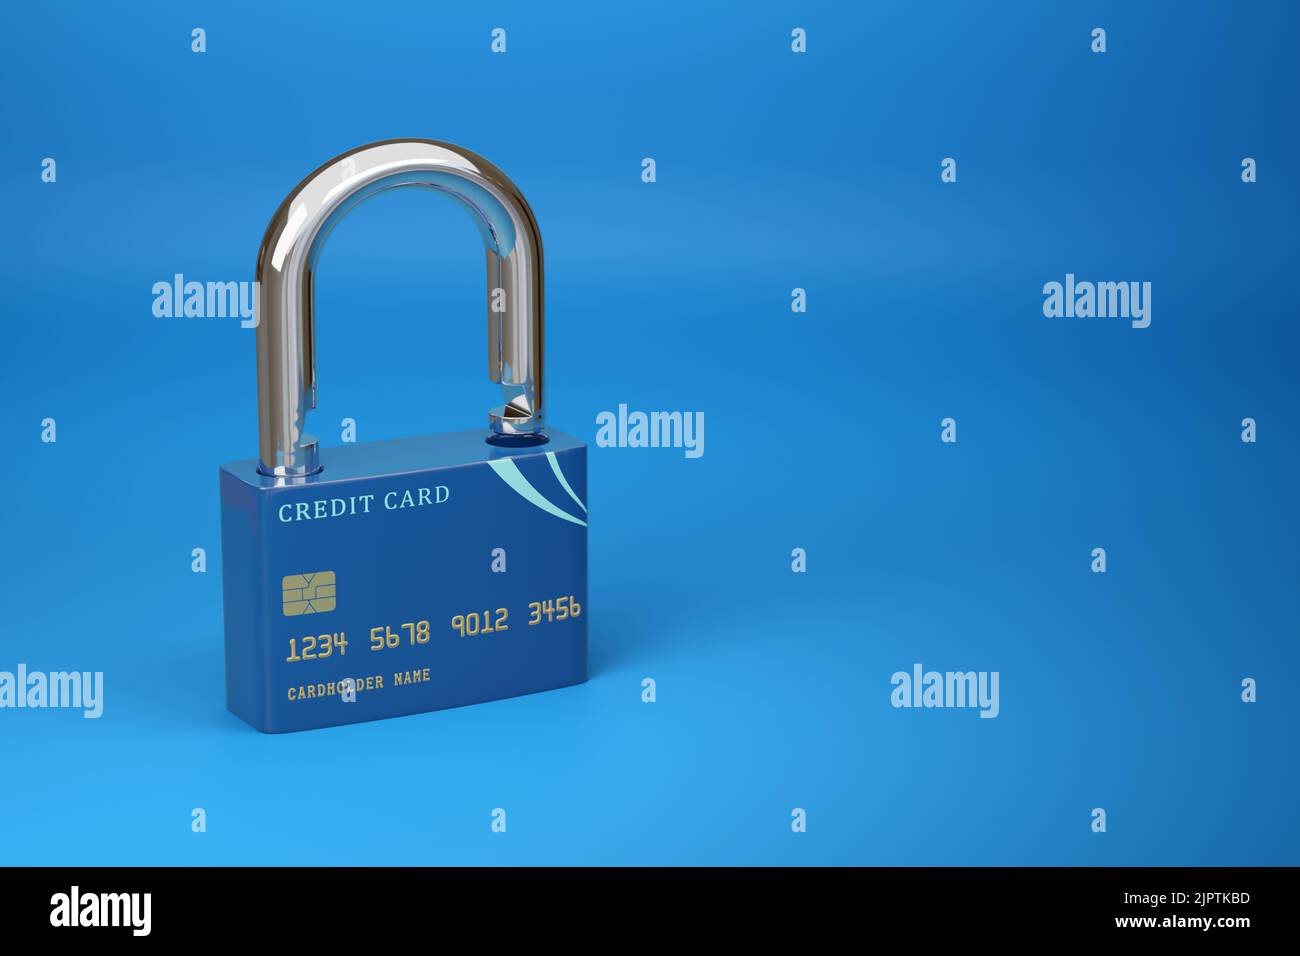 Credit card in the shape of an open padlock with copy space. Security concept. 3d illustration. Stock Photo